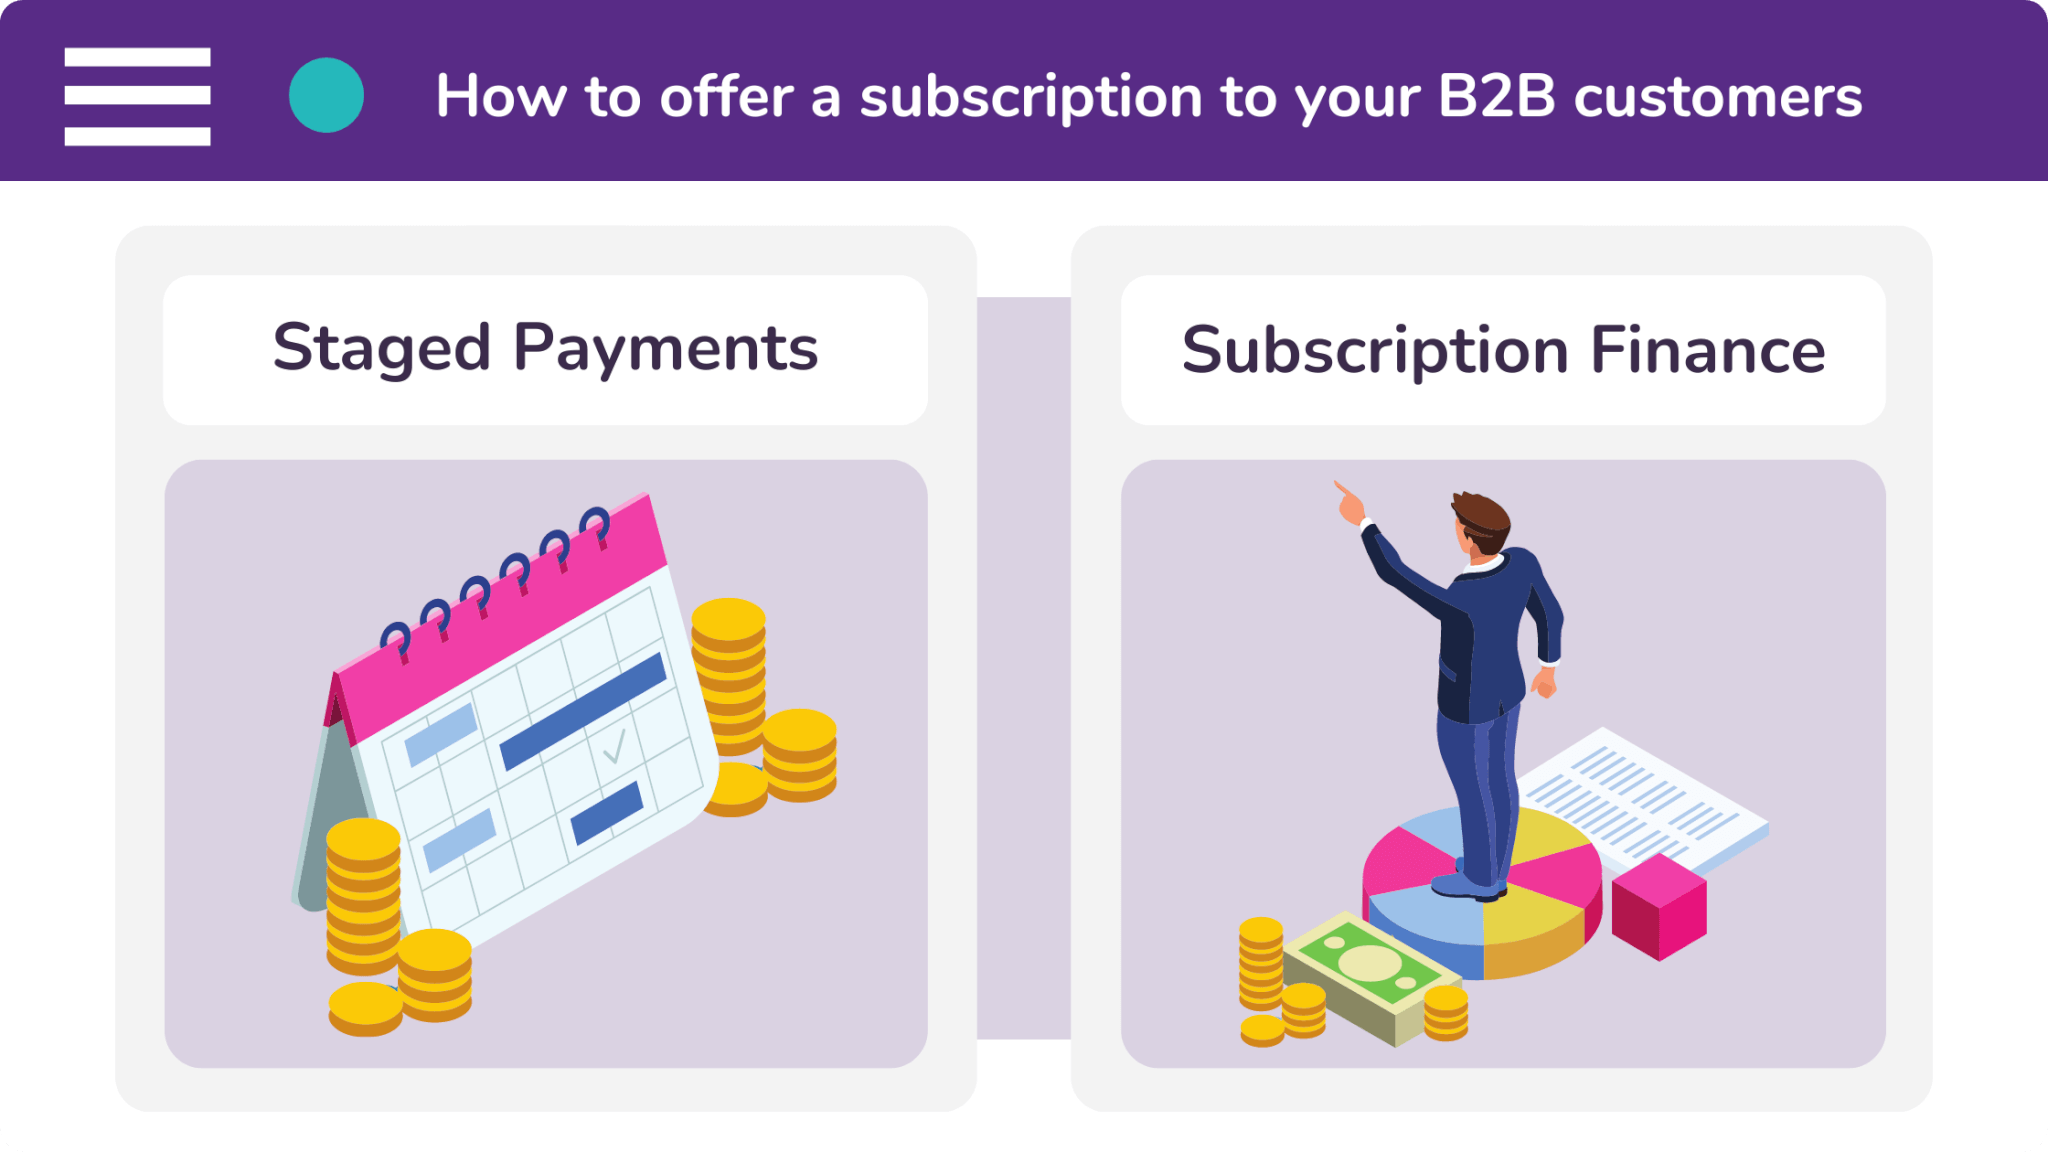 If you want to offer a subscription to your B2B customers, you have two options: staged payments and subscription-based finance.